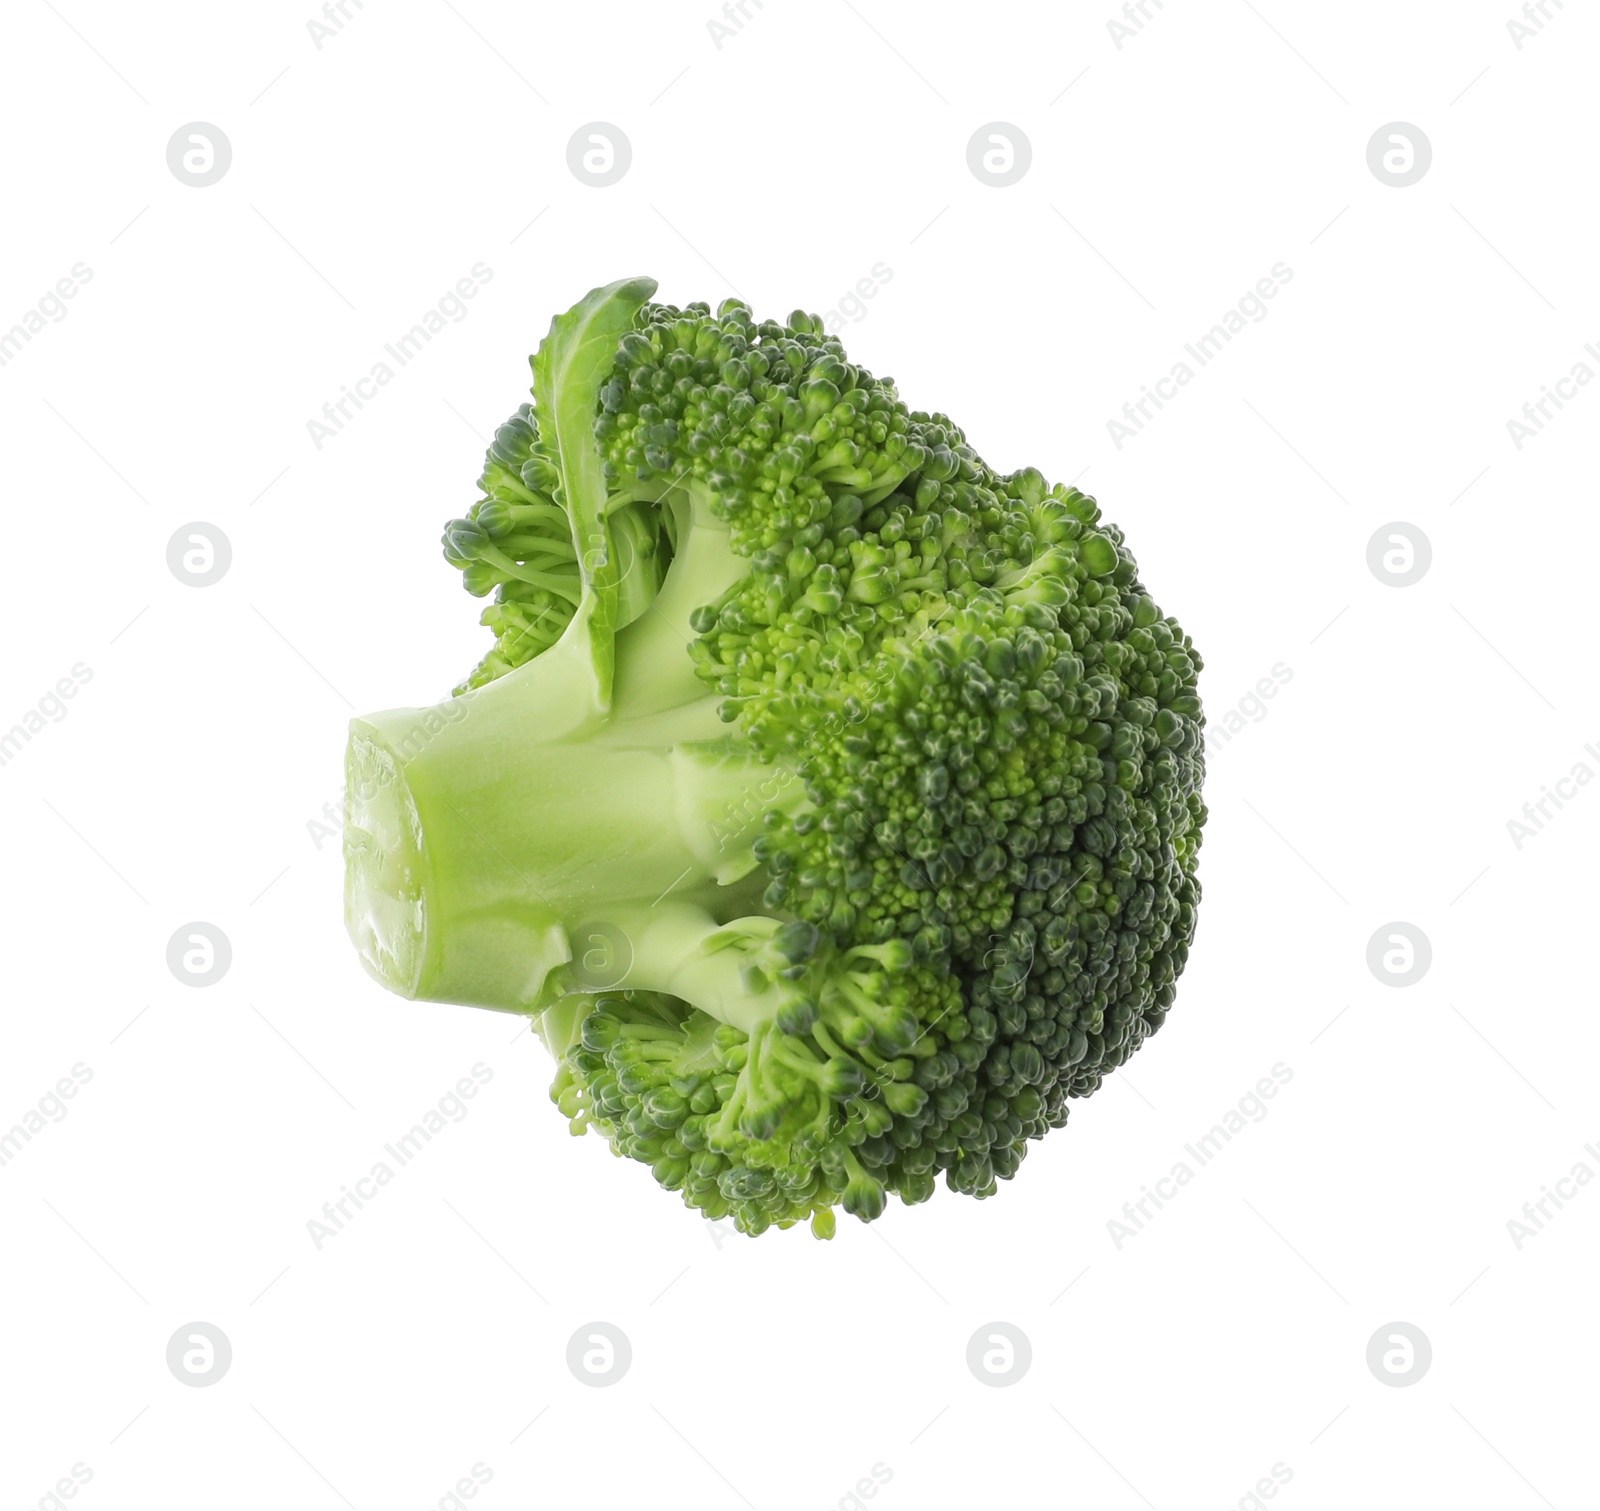 Photo of Piece of fresh green broccoli isolated on white